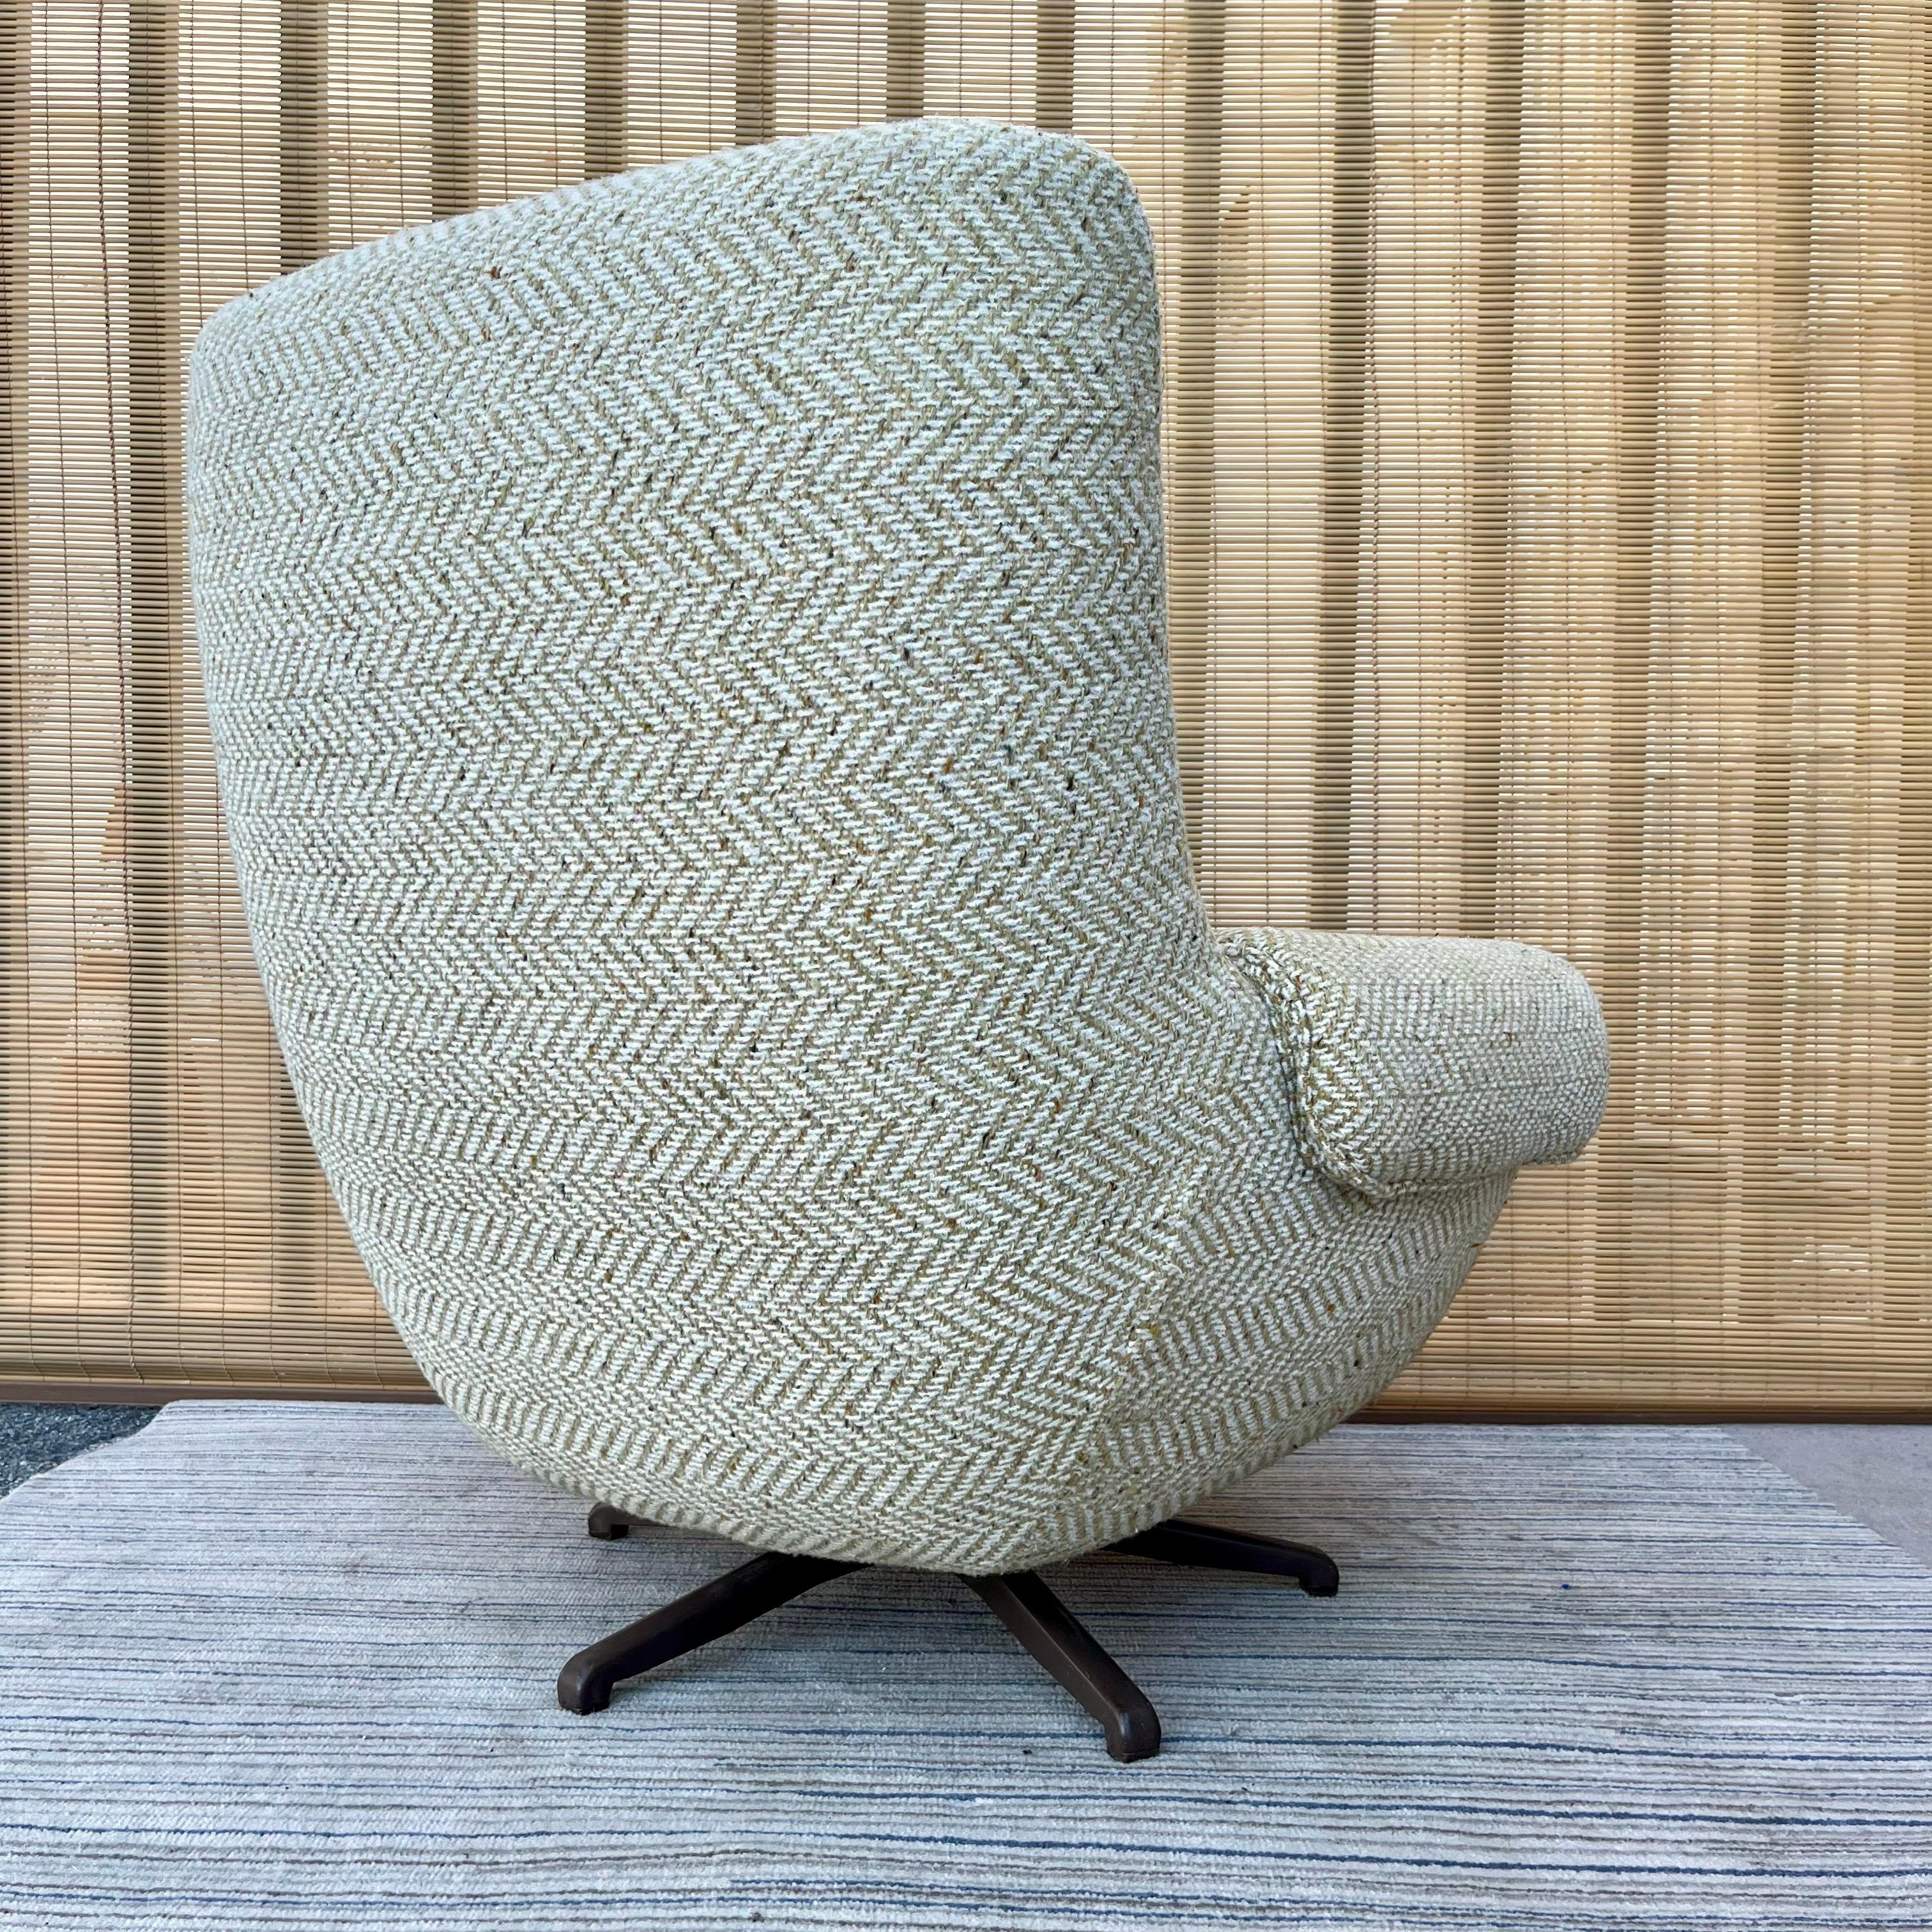 American 1960s Mid-Century Modern Highback Swivel Lounge Chair by Carter Chair Company